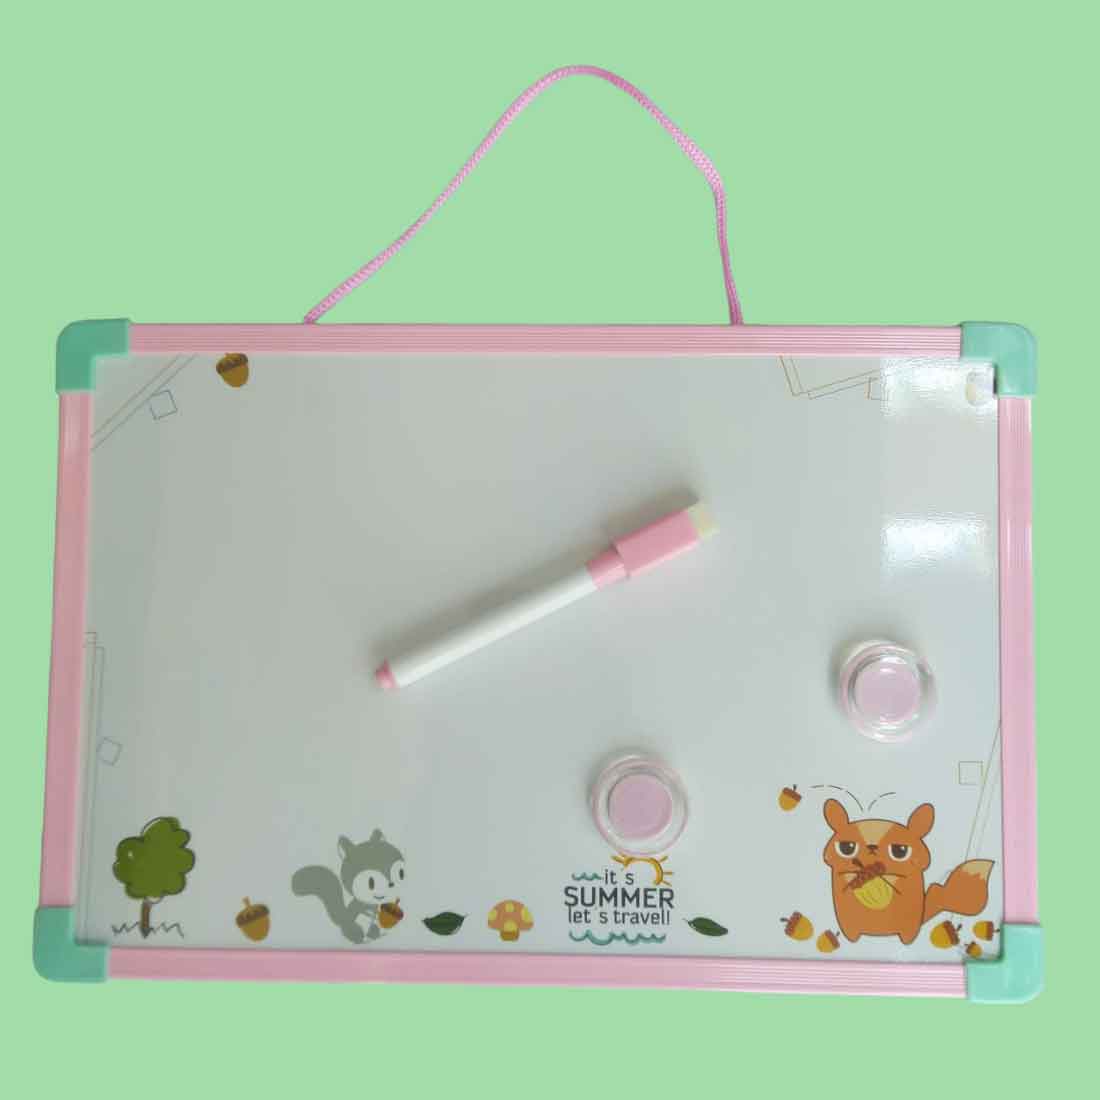 White Board Double Side with Magnetic Marker, Duster & 2 Magnetic Buttons | Marker Board | Weekly Plan Memo Board - For Kids Study